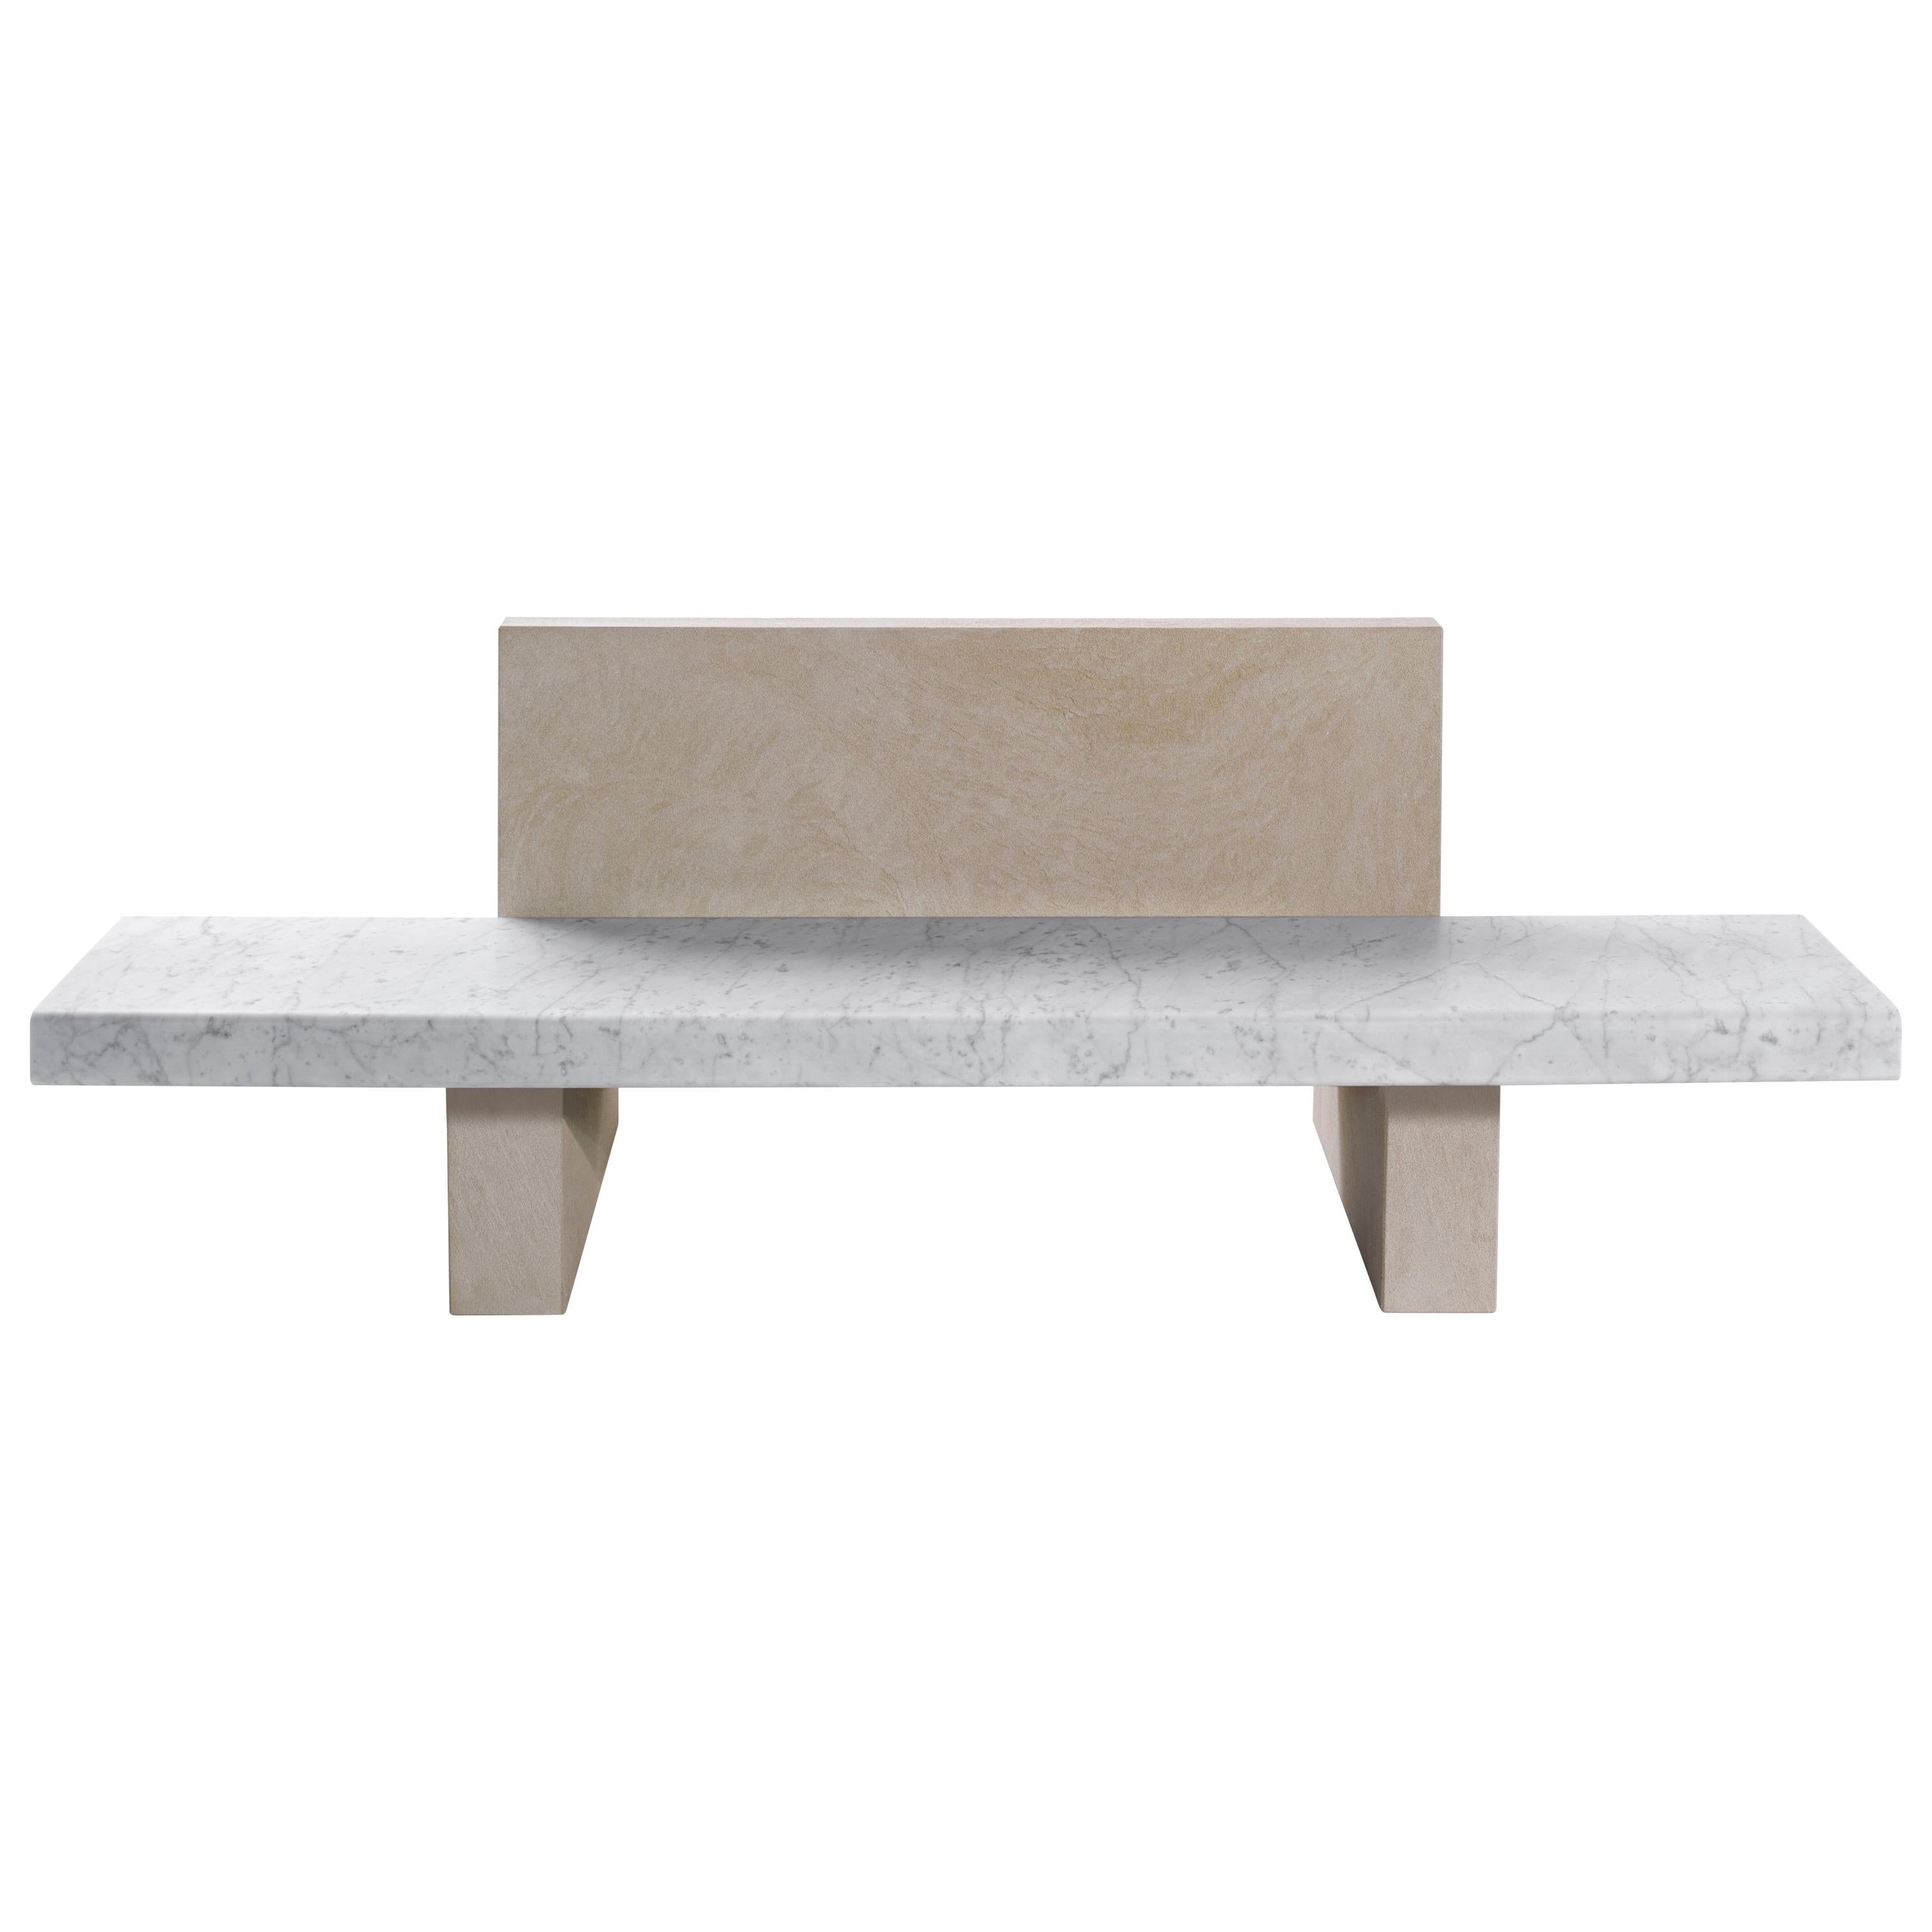 Salvatori Span Outdoor Bench in Bianco Carrara with Backrest by John Pawson For Sale